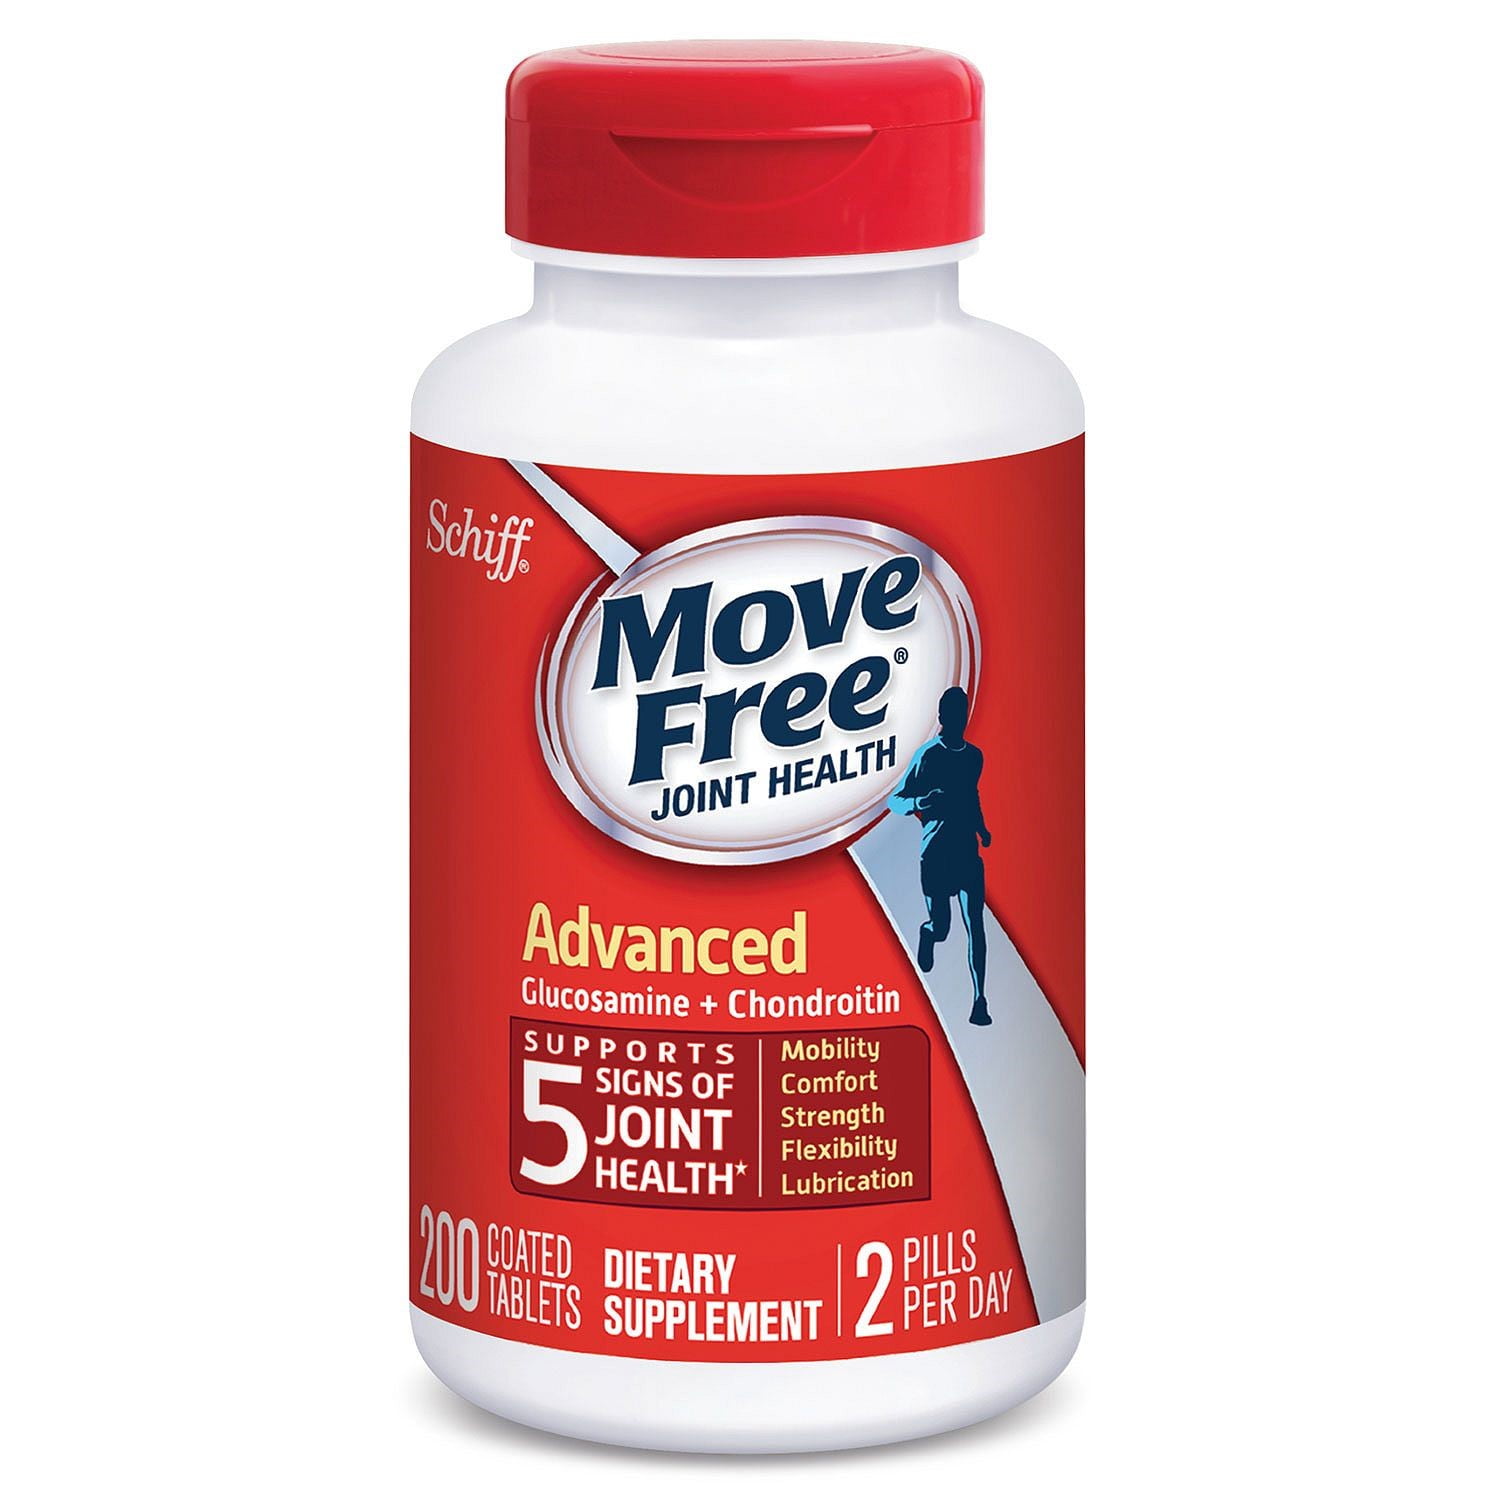 Move Free Joint Health Supplement Tablets- 120 count – Direct FSA